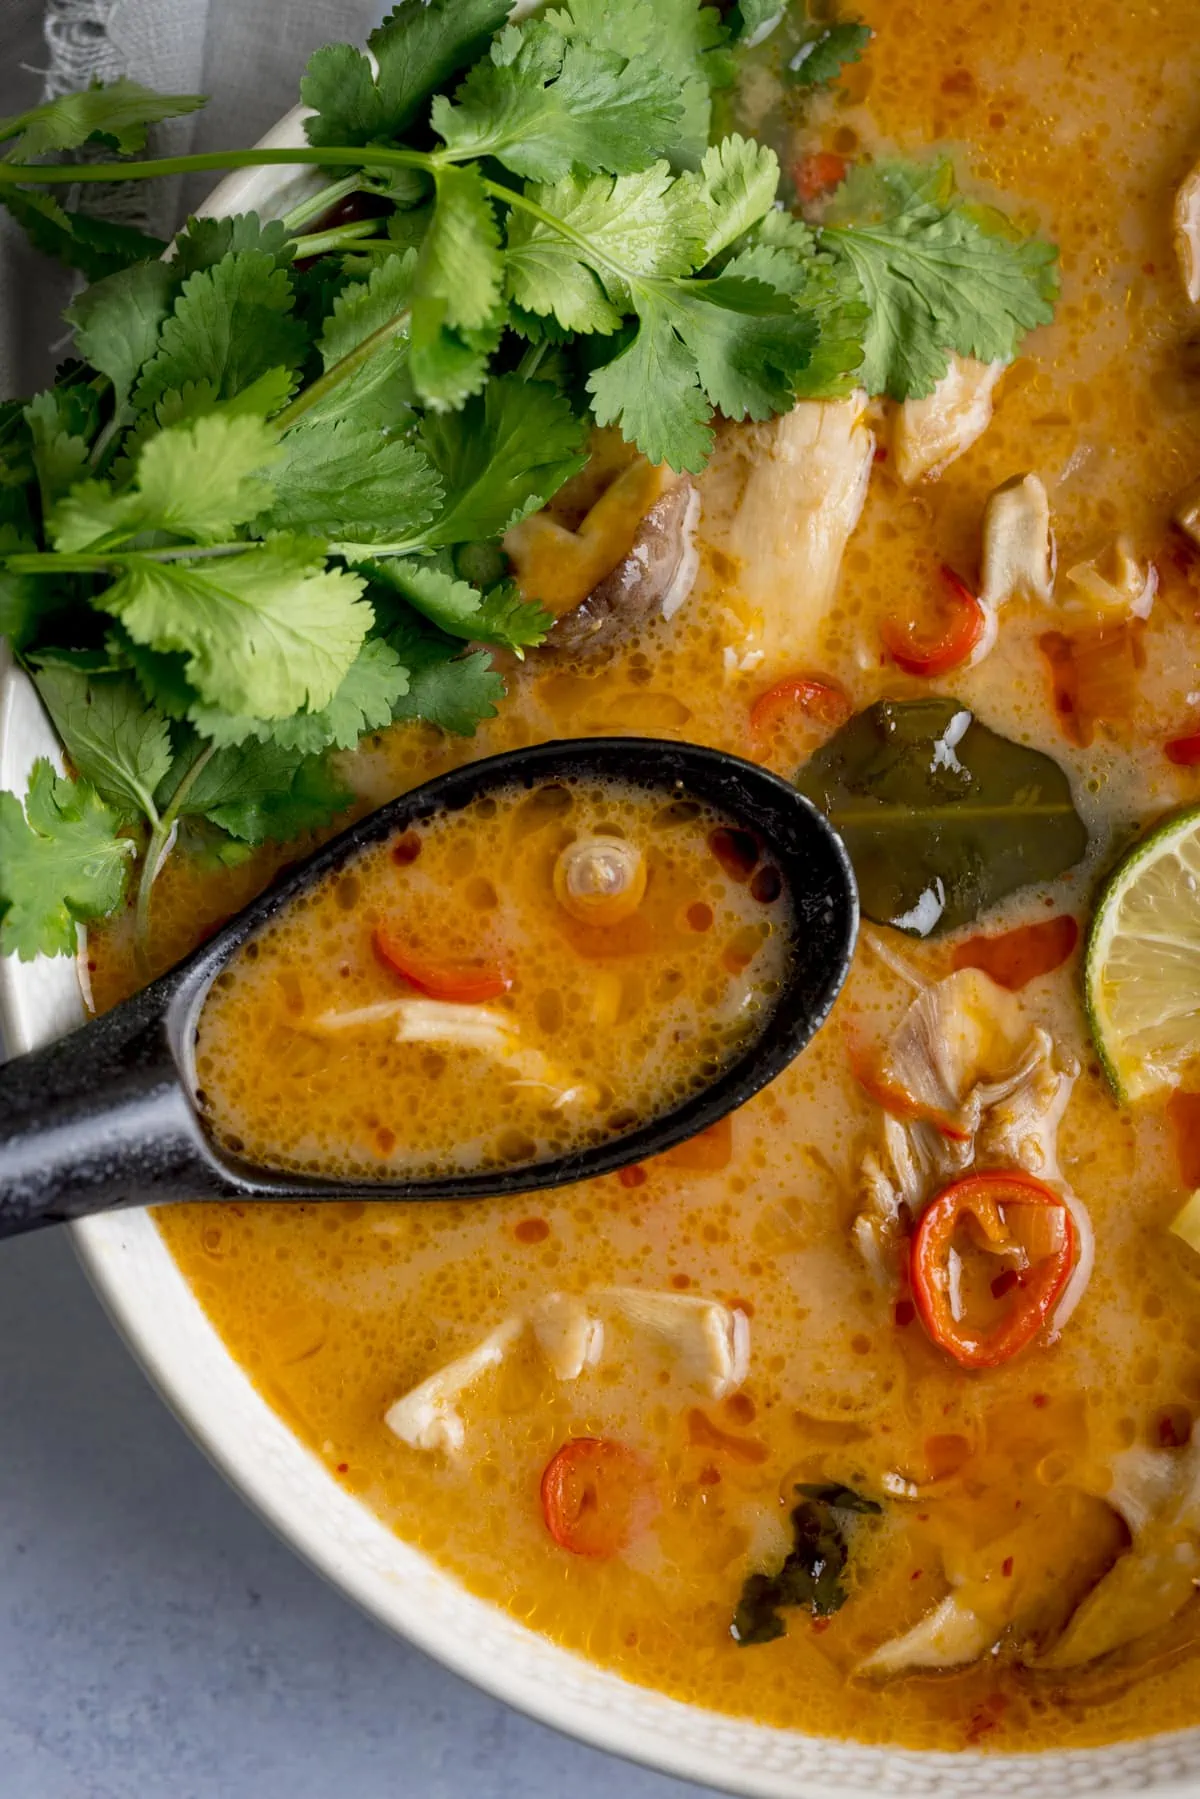 Close up of a spoonful of soup being taken from a bowl of Tom Kha Gai - a Thai chicken soup with coconut milk and galangal. The soup is in a white bowl on a light background. The soup is garnished with fresh coriander.